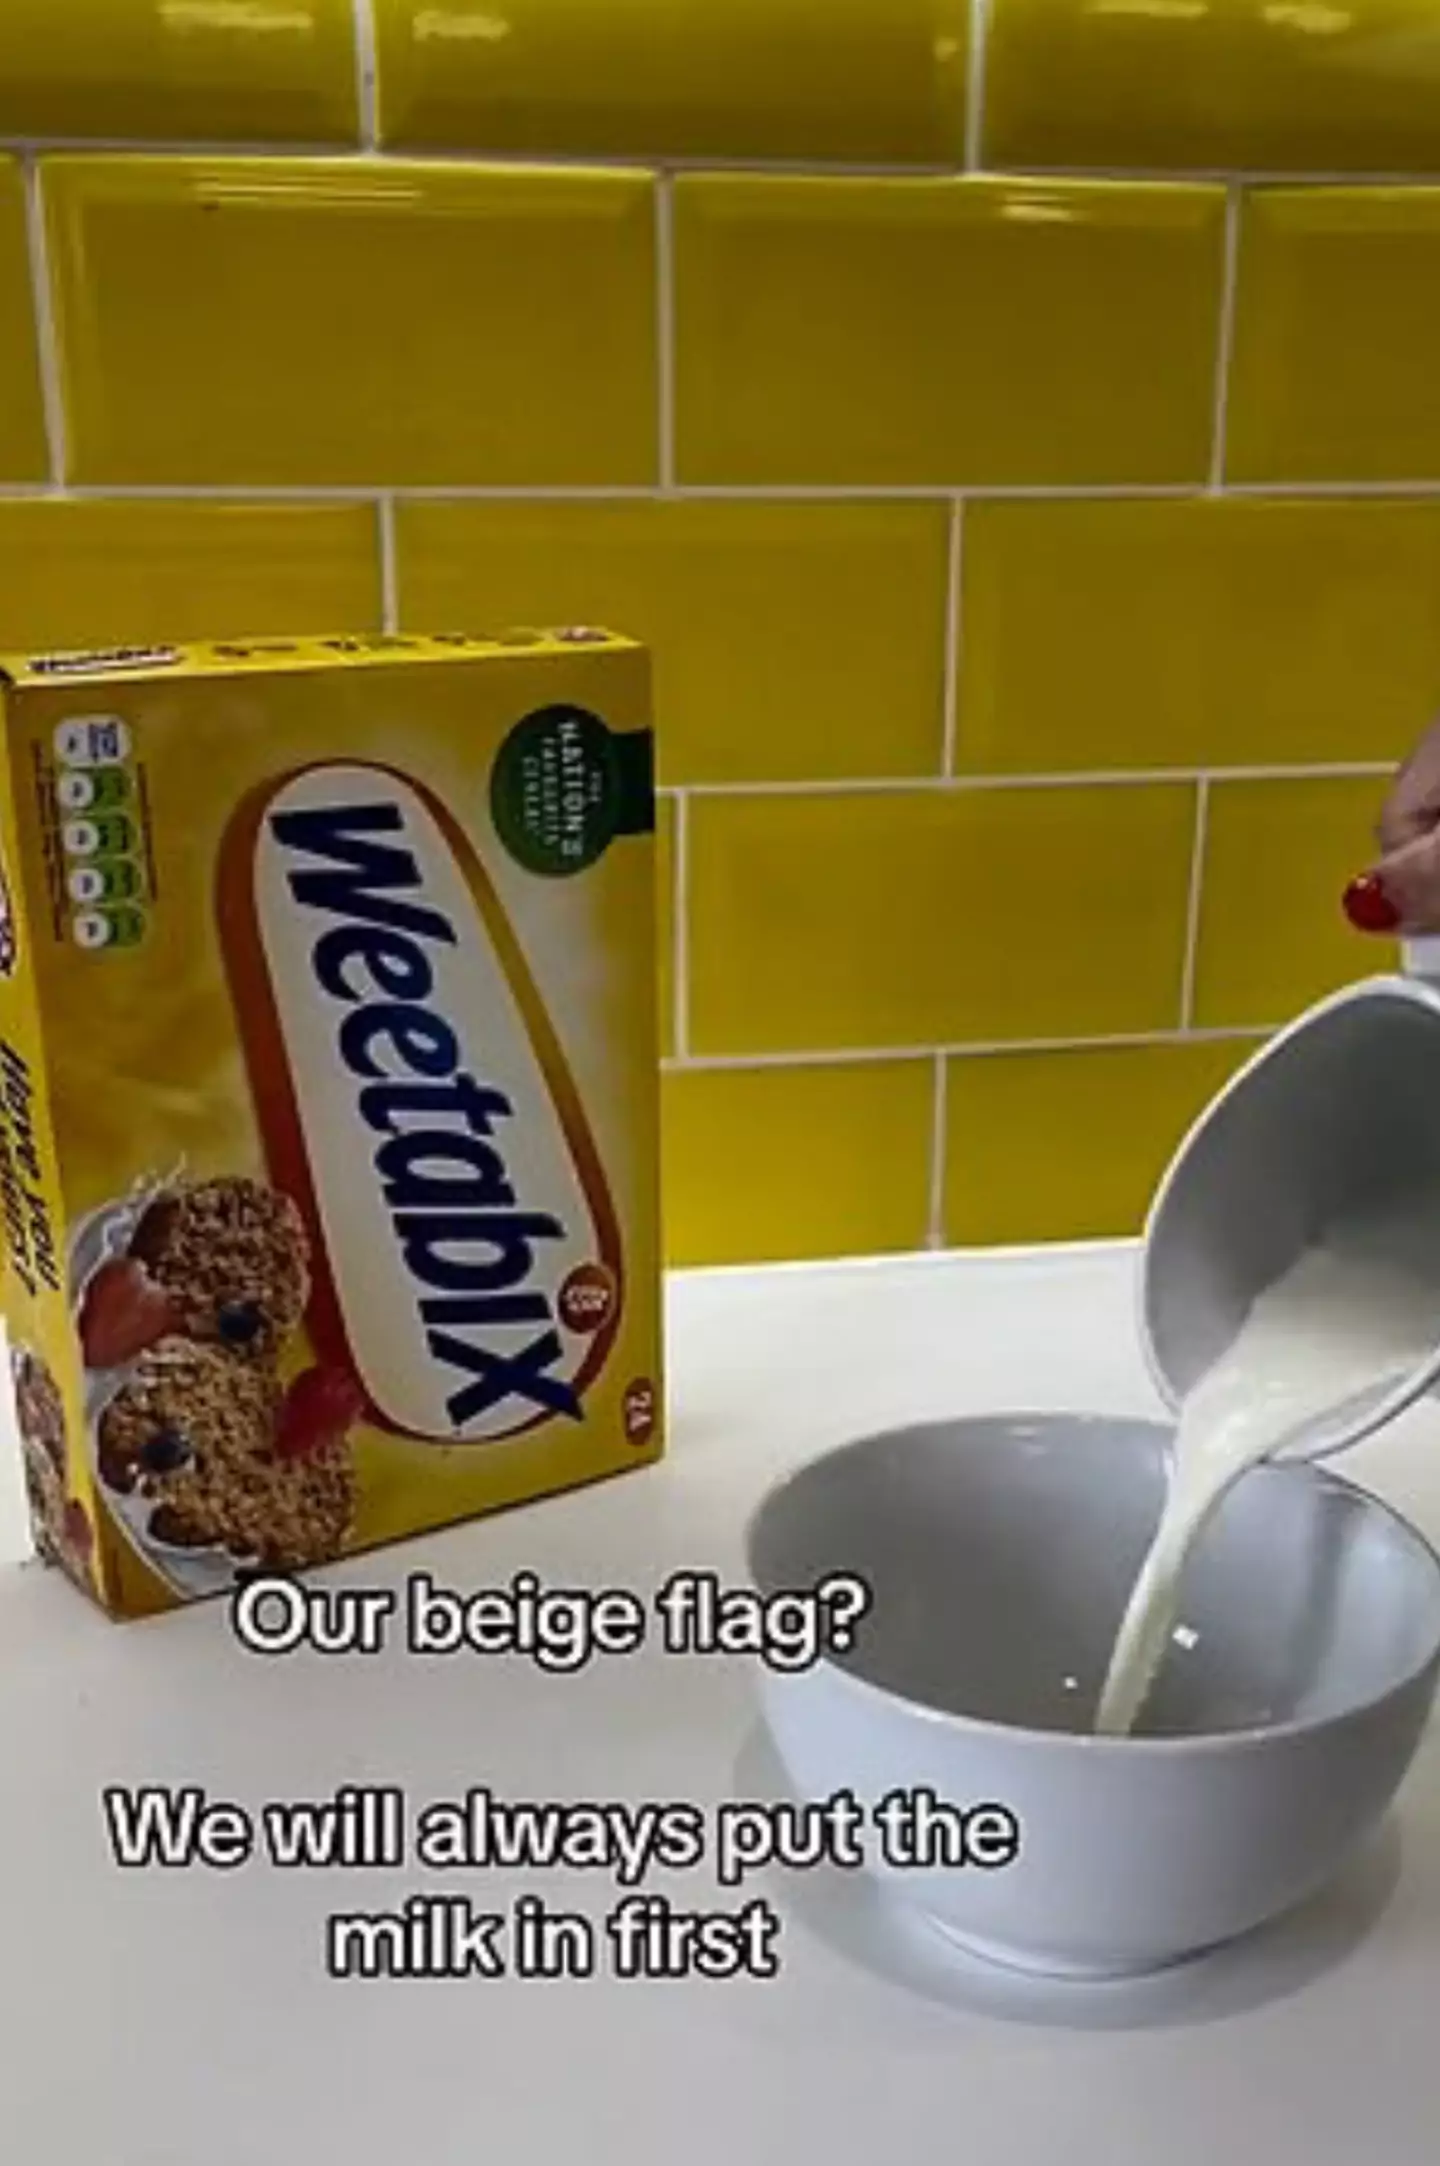 Weetabix posted a video of the milk being poured first.